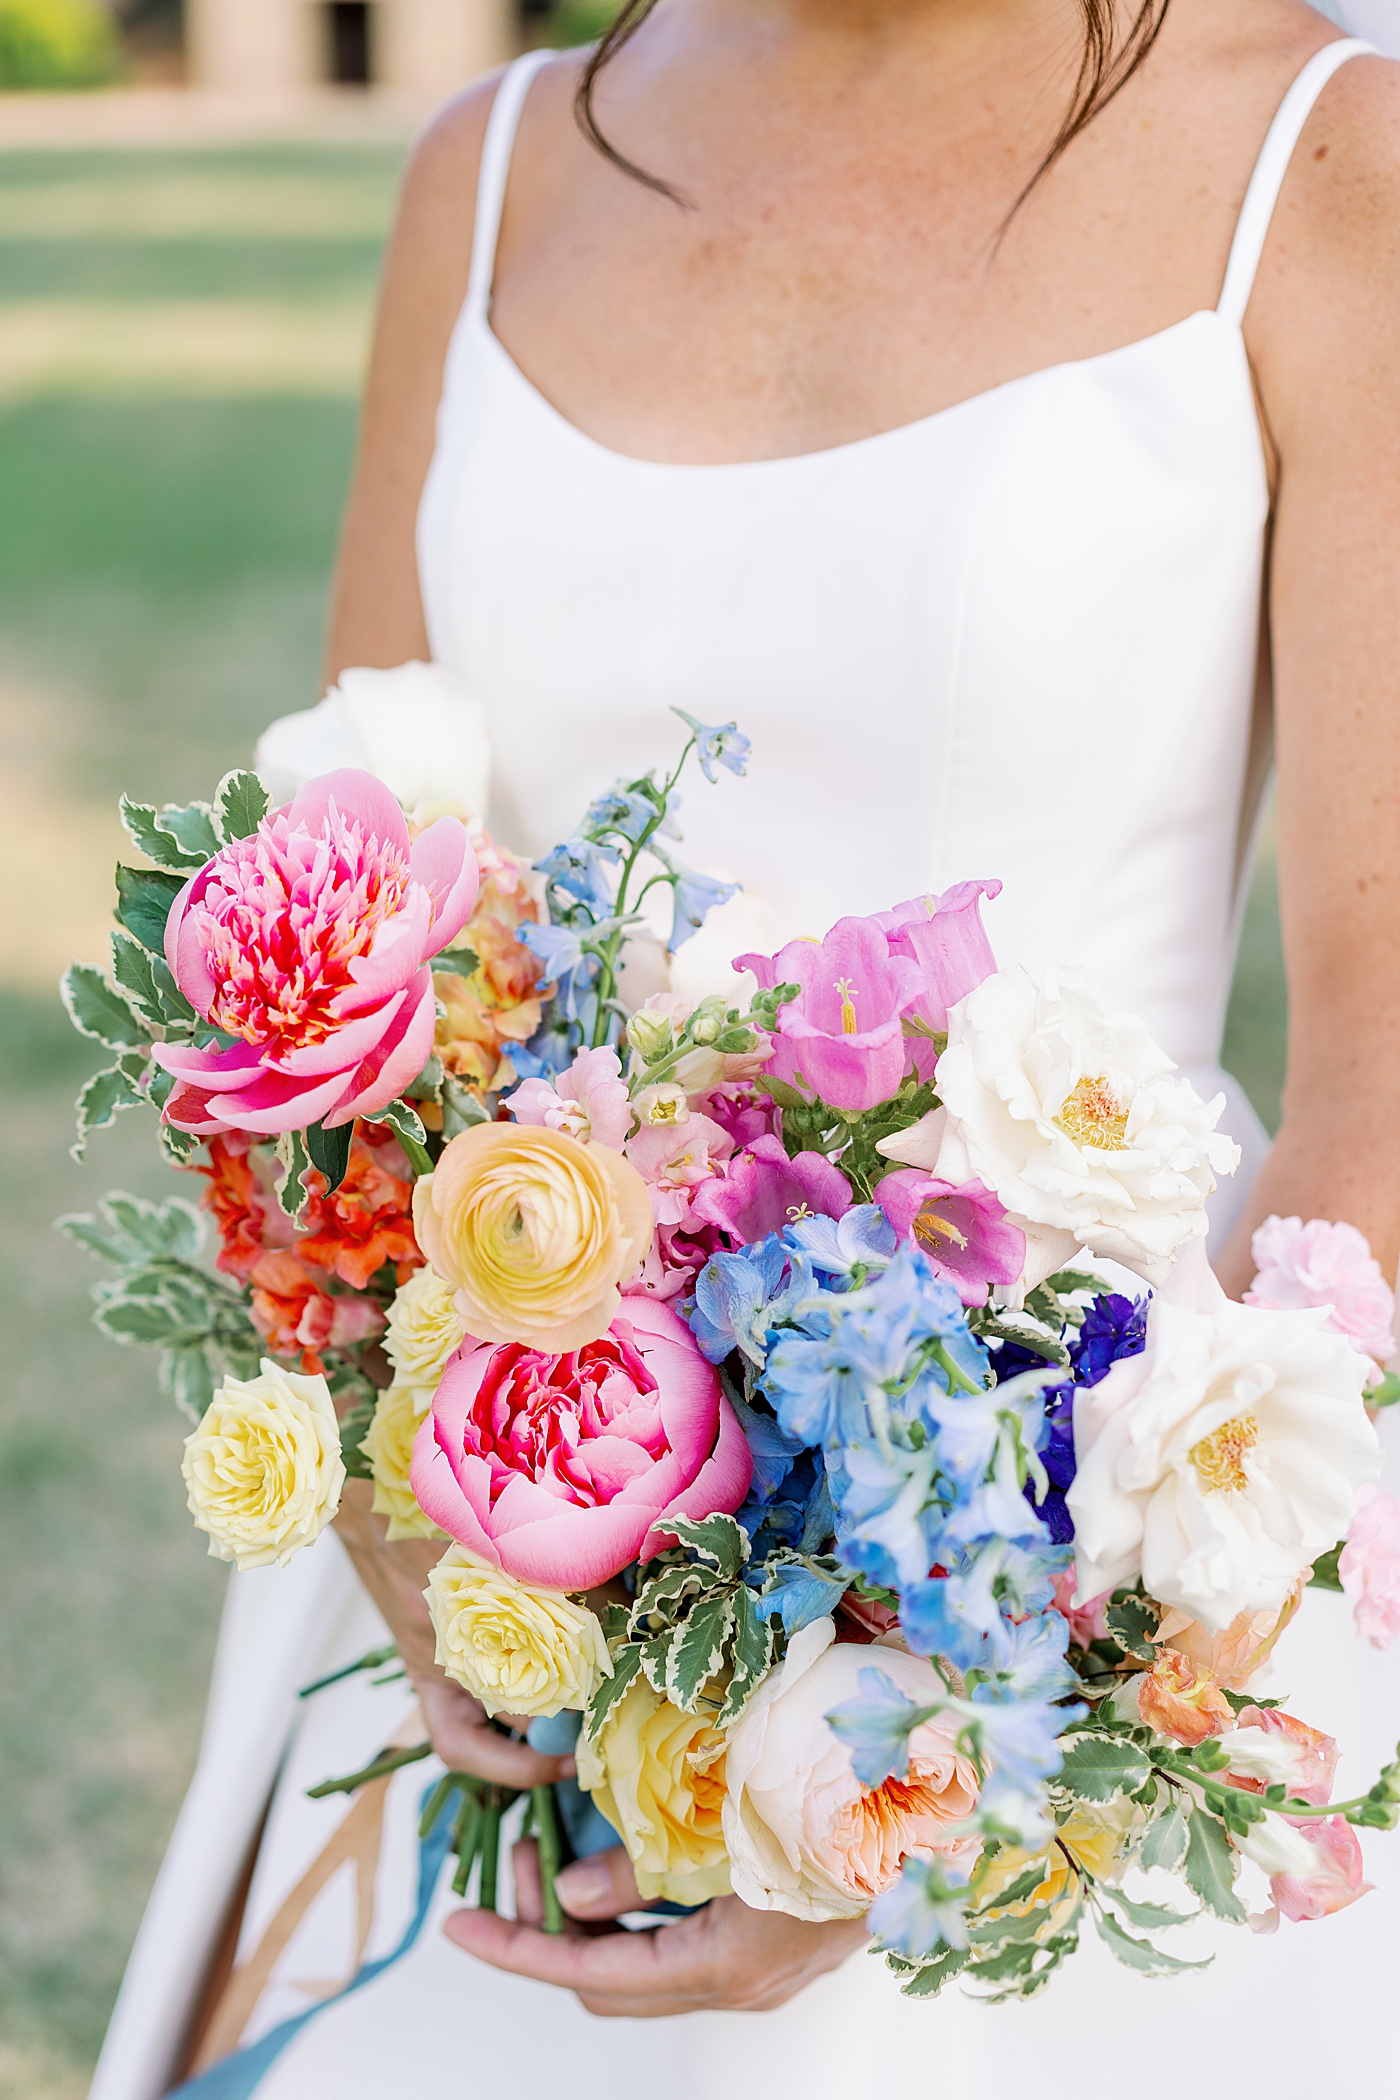 Detail of colorful bridal bouquet | Photo by Annie Laura Photo